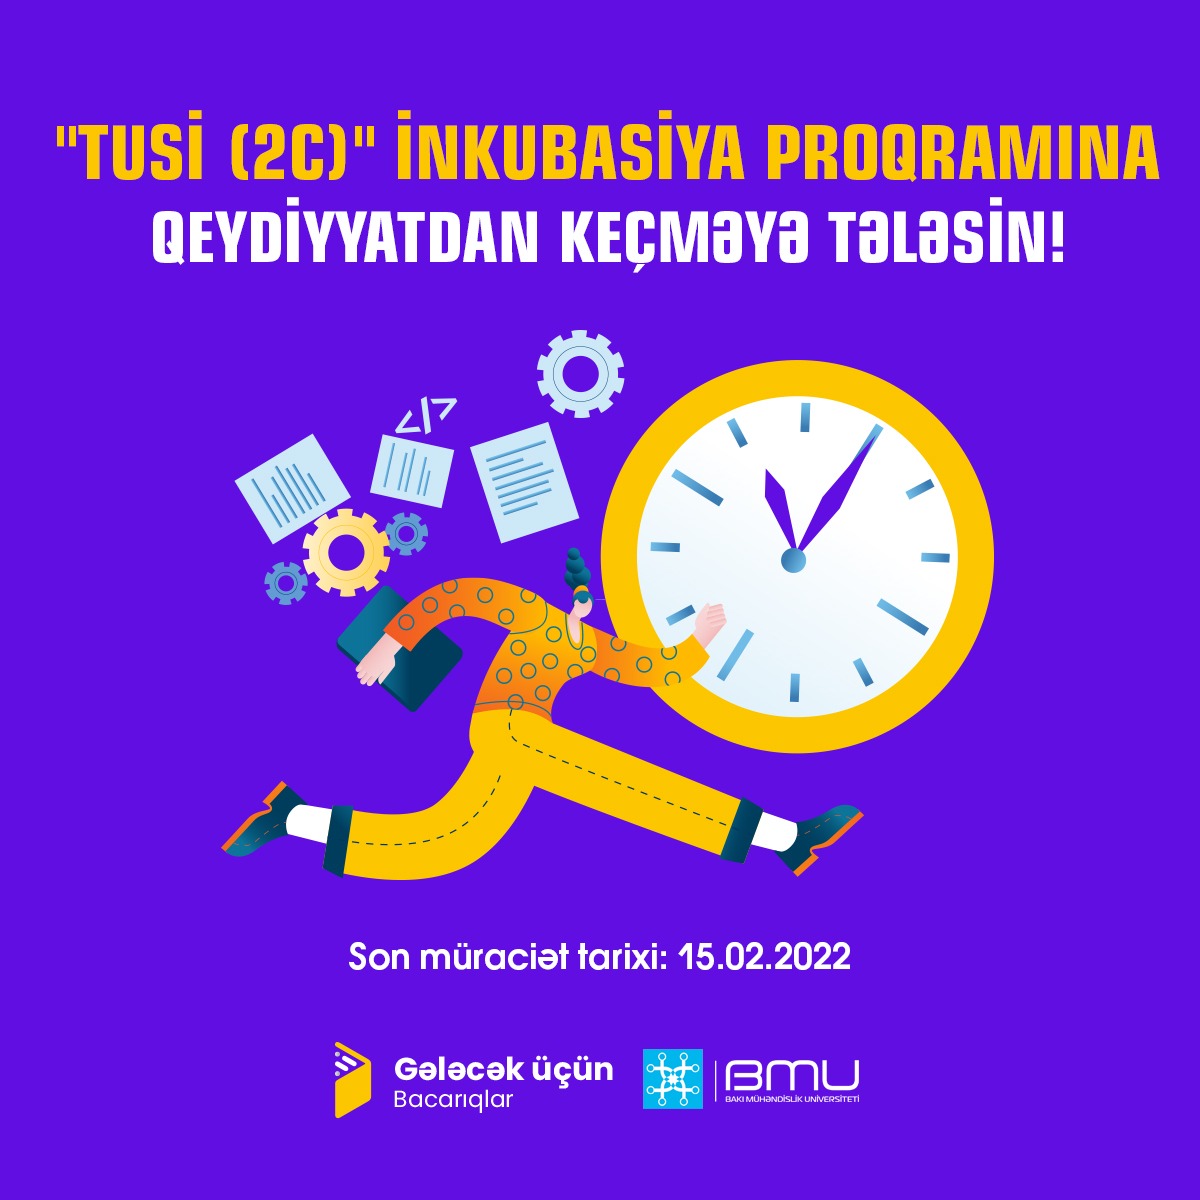 To attention of those who want to participate in Tusi (2C) incubation program!